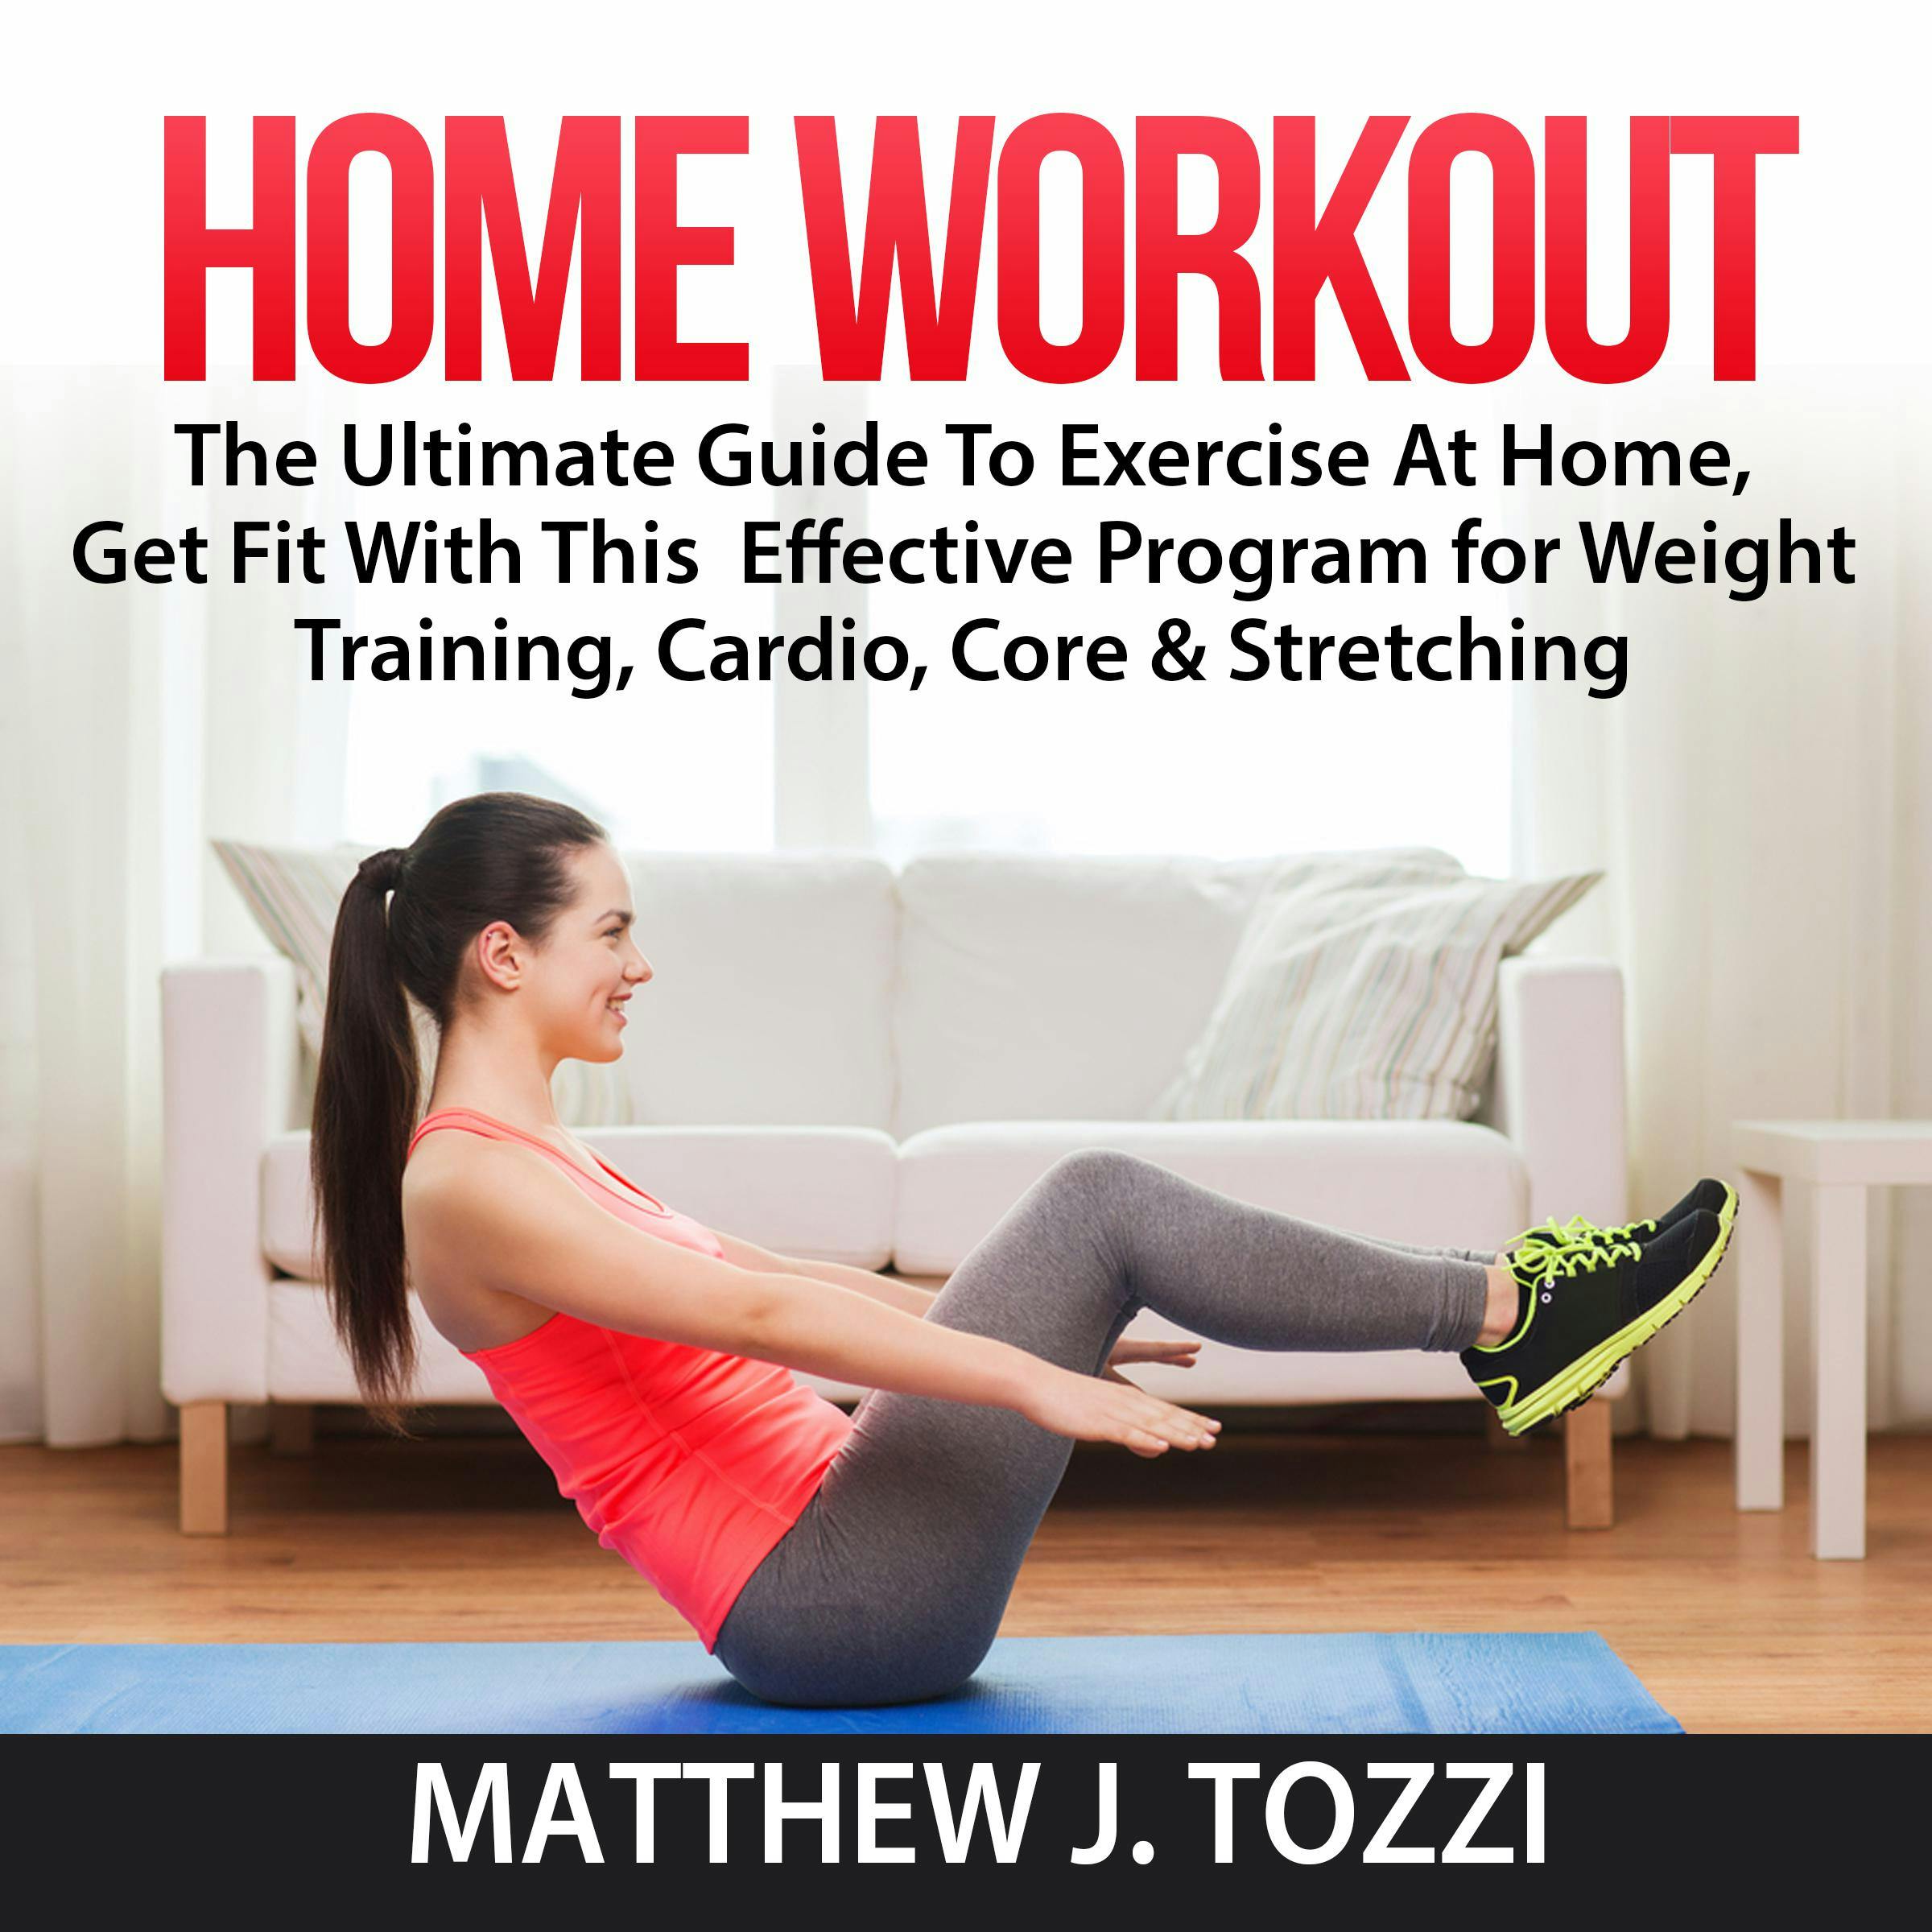 Home Workout: The Ultimate Guide To Exercise At Home, Get Fit With This  Effective Program for Weight Training, Cardio, Core & Stretching - Matthew J. Tozzi